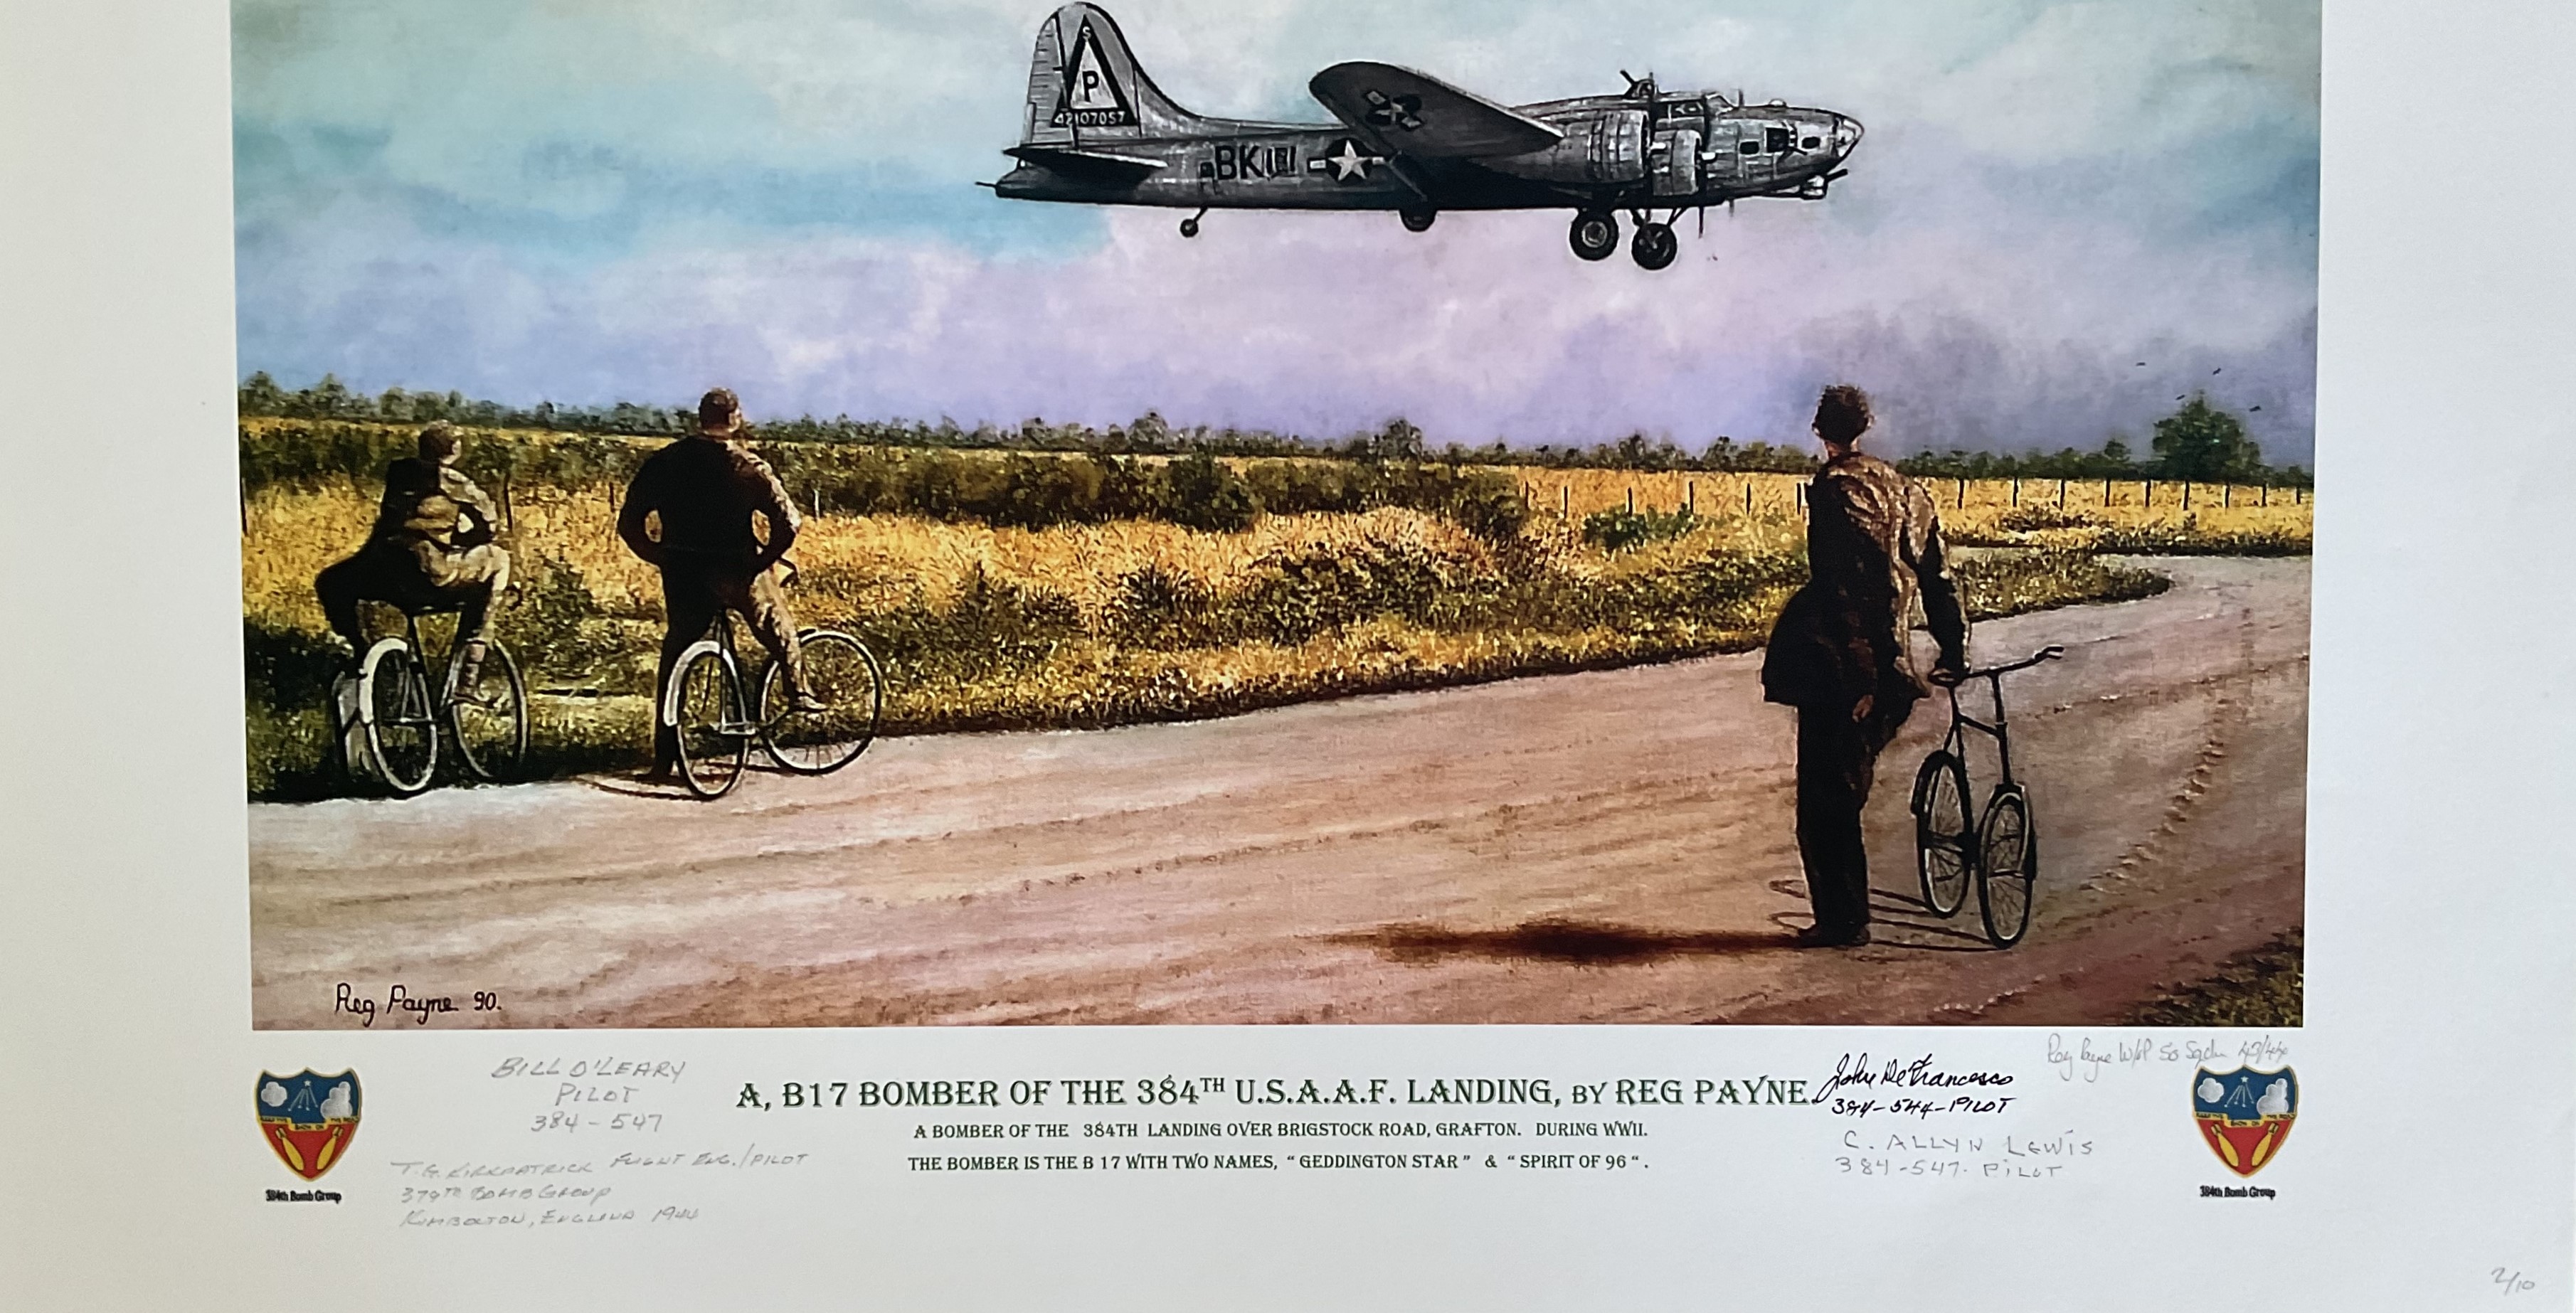 A B17 Bomber of The 384th U.S.A.A.F Landing By Reg Payne, Limited Edition Print Signed by 4 - Image 2 of 2